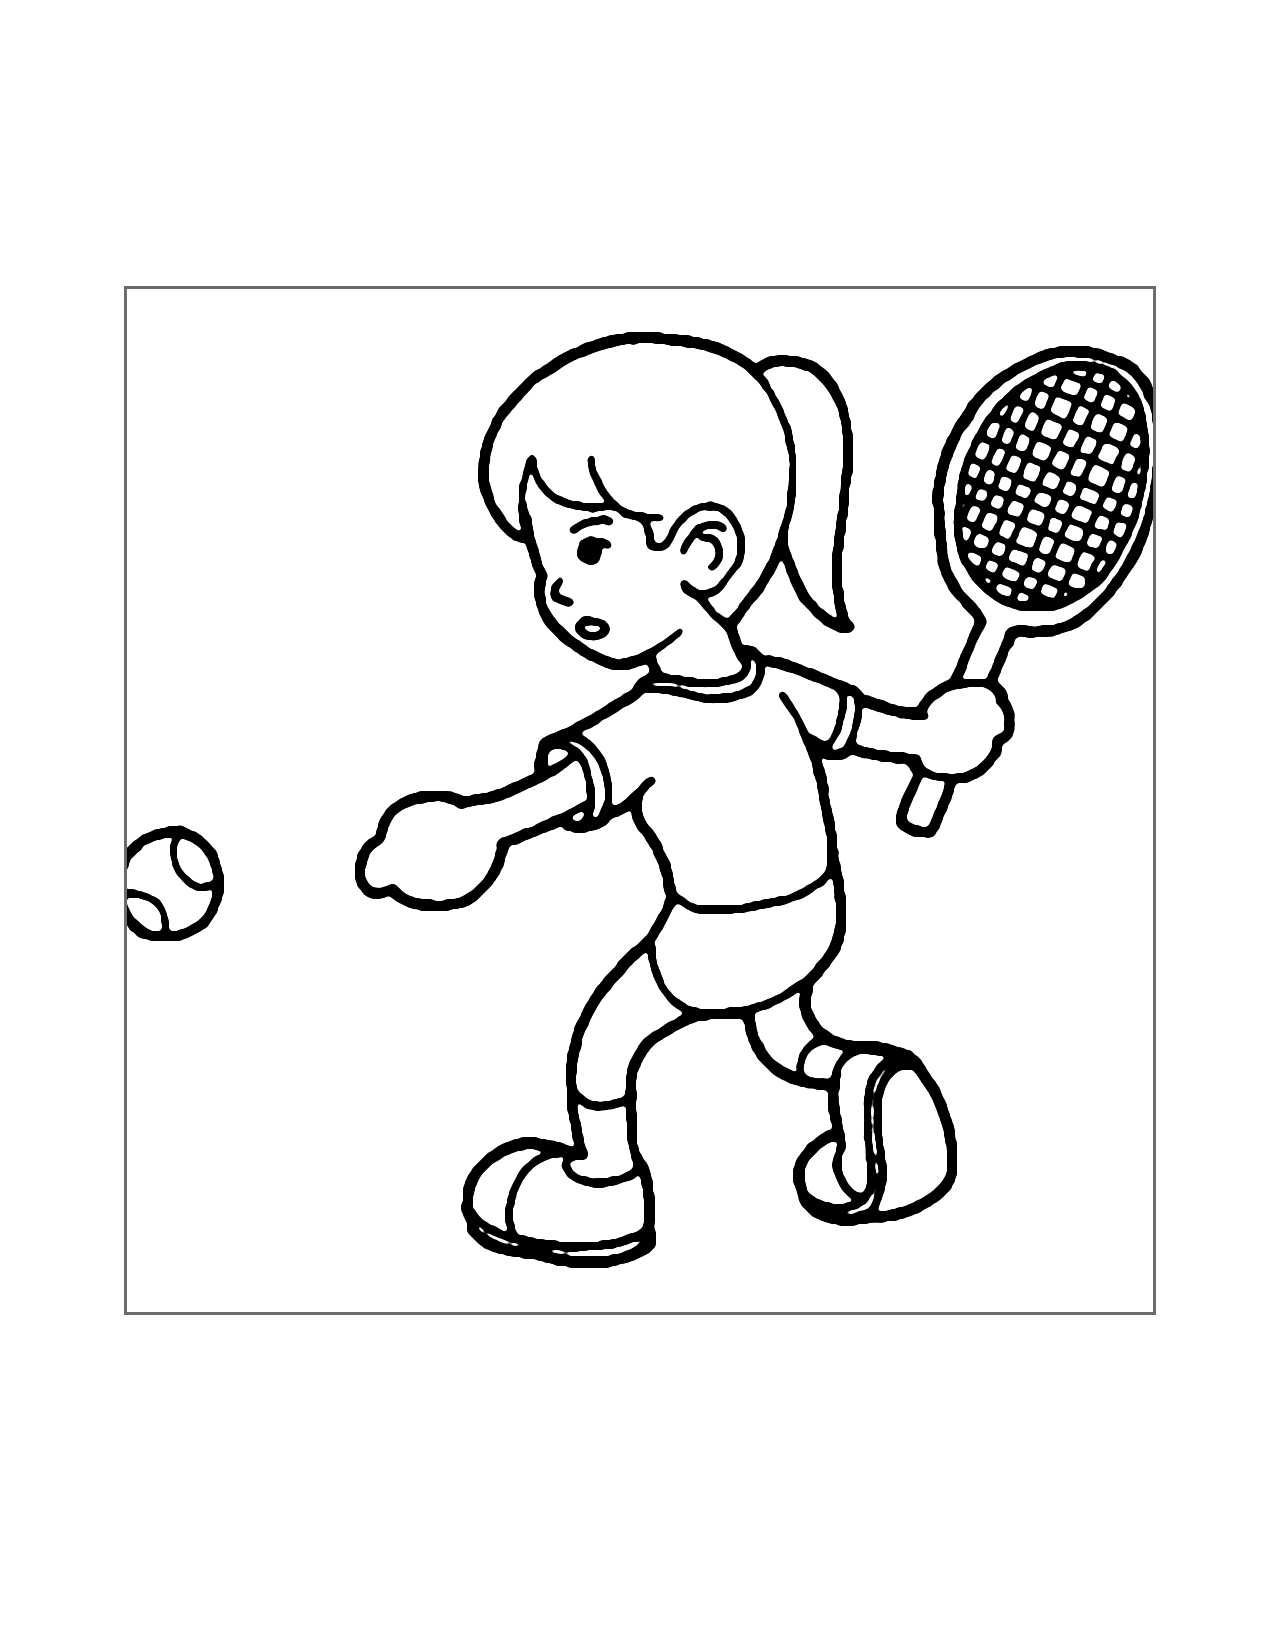 Young Girl Playing Tennis Coloring Page